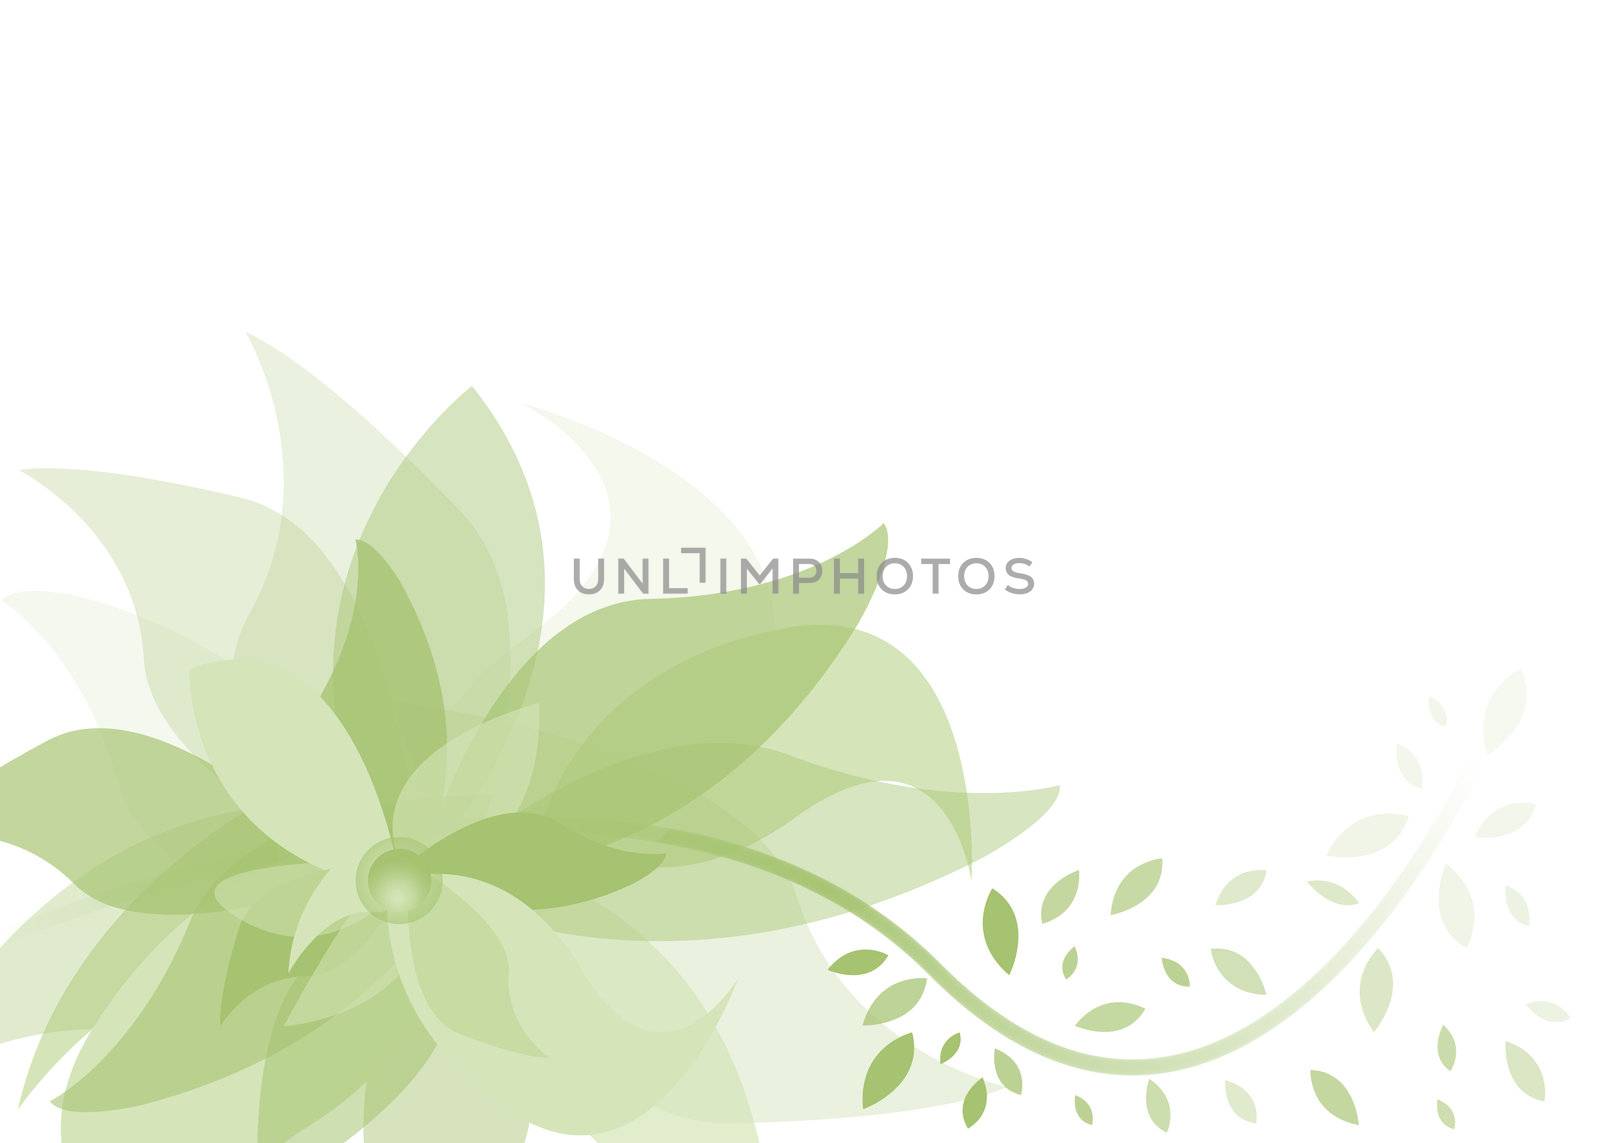 A beautiful green flower background with abstract petals and leaves